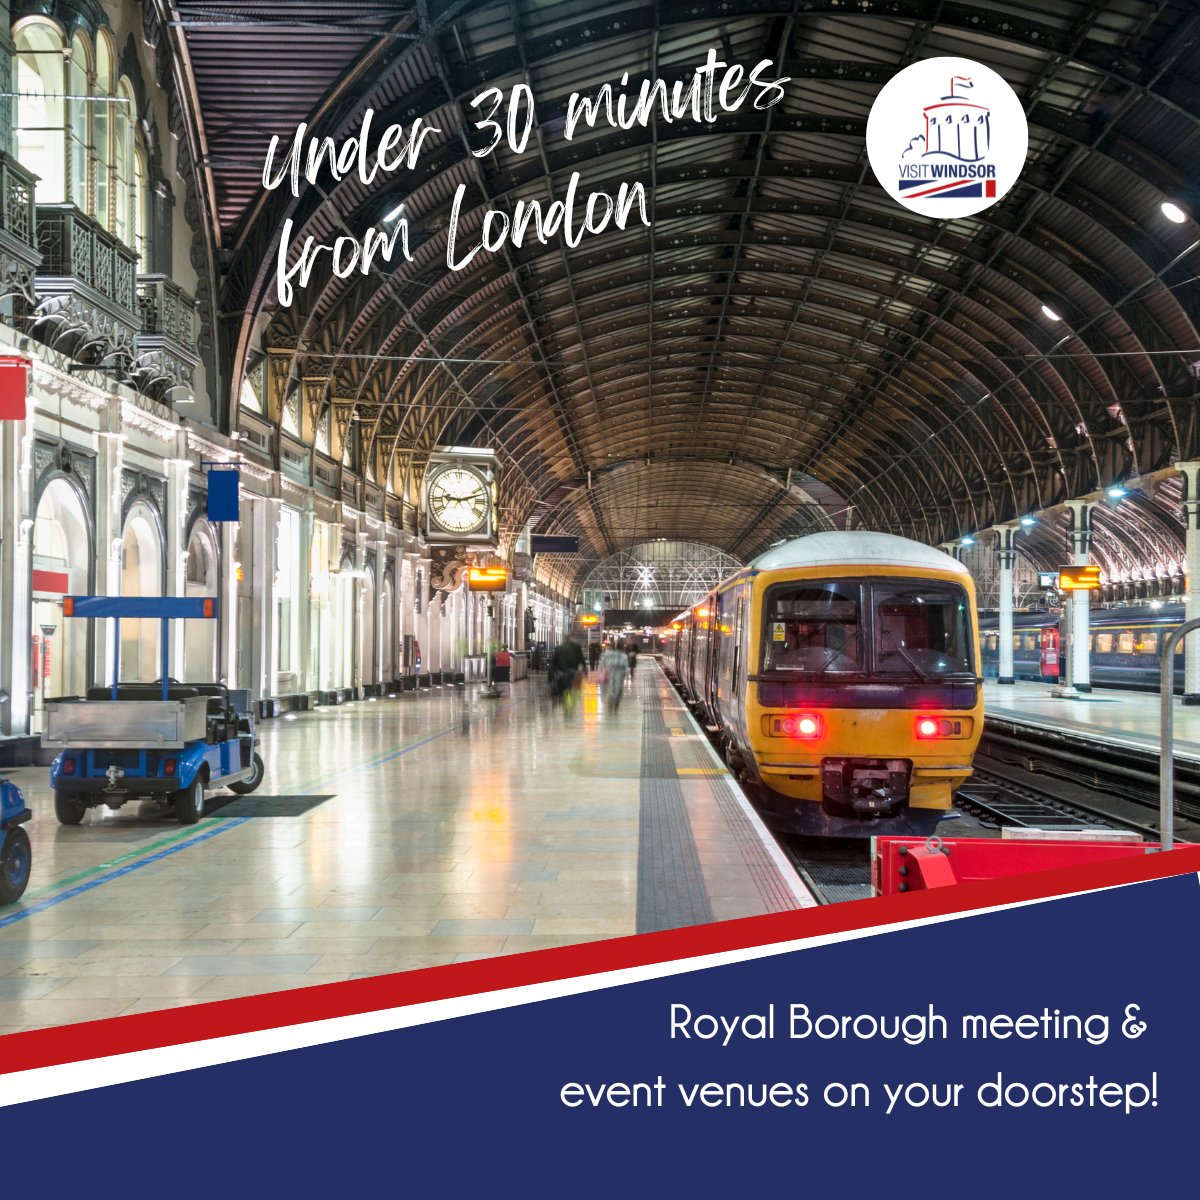 In its first week, more than 2.5 million journeys were made on the Elizabeth Line. This means our Royal Borough location is closer than ever for events and conferences! Sign up to our e-news: bit.ly/MICEenews
#royalconnections #royalwindsor #eventprofs
@MeetBeyondLDN